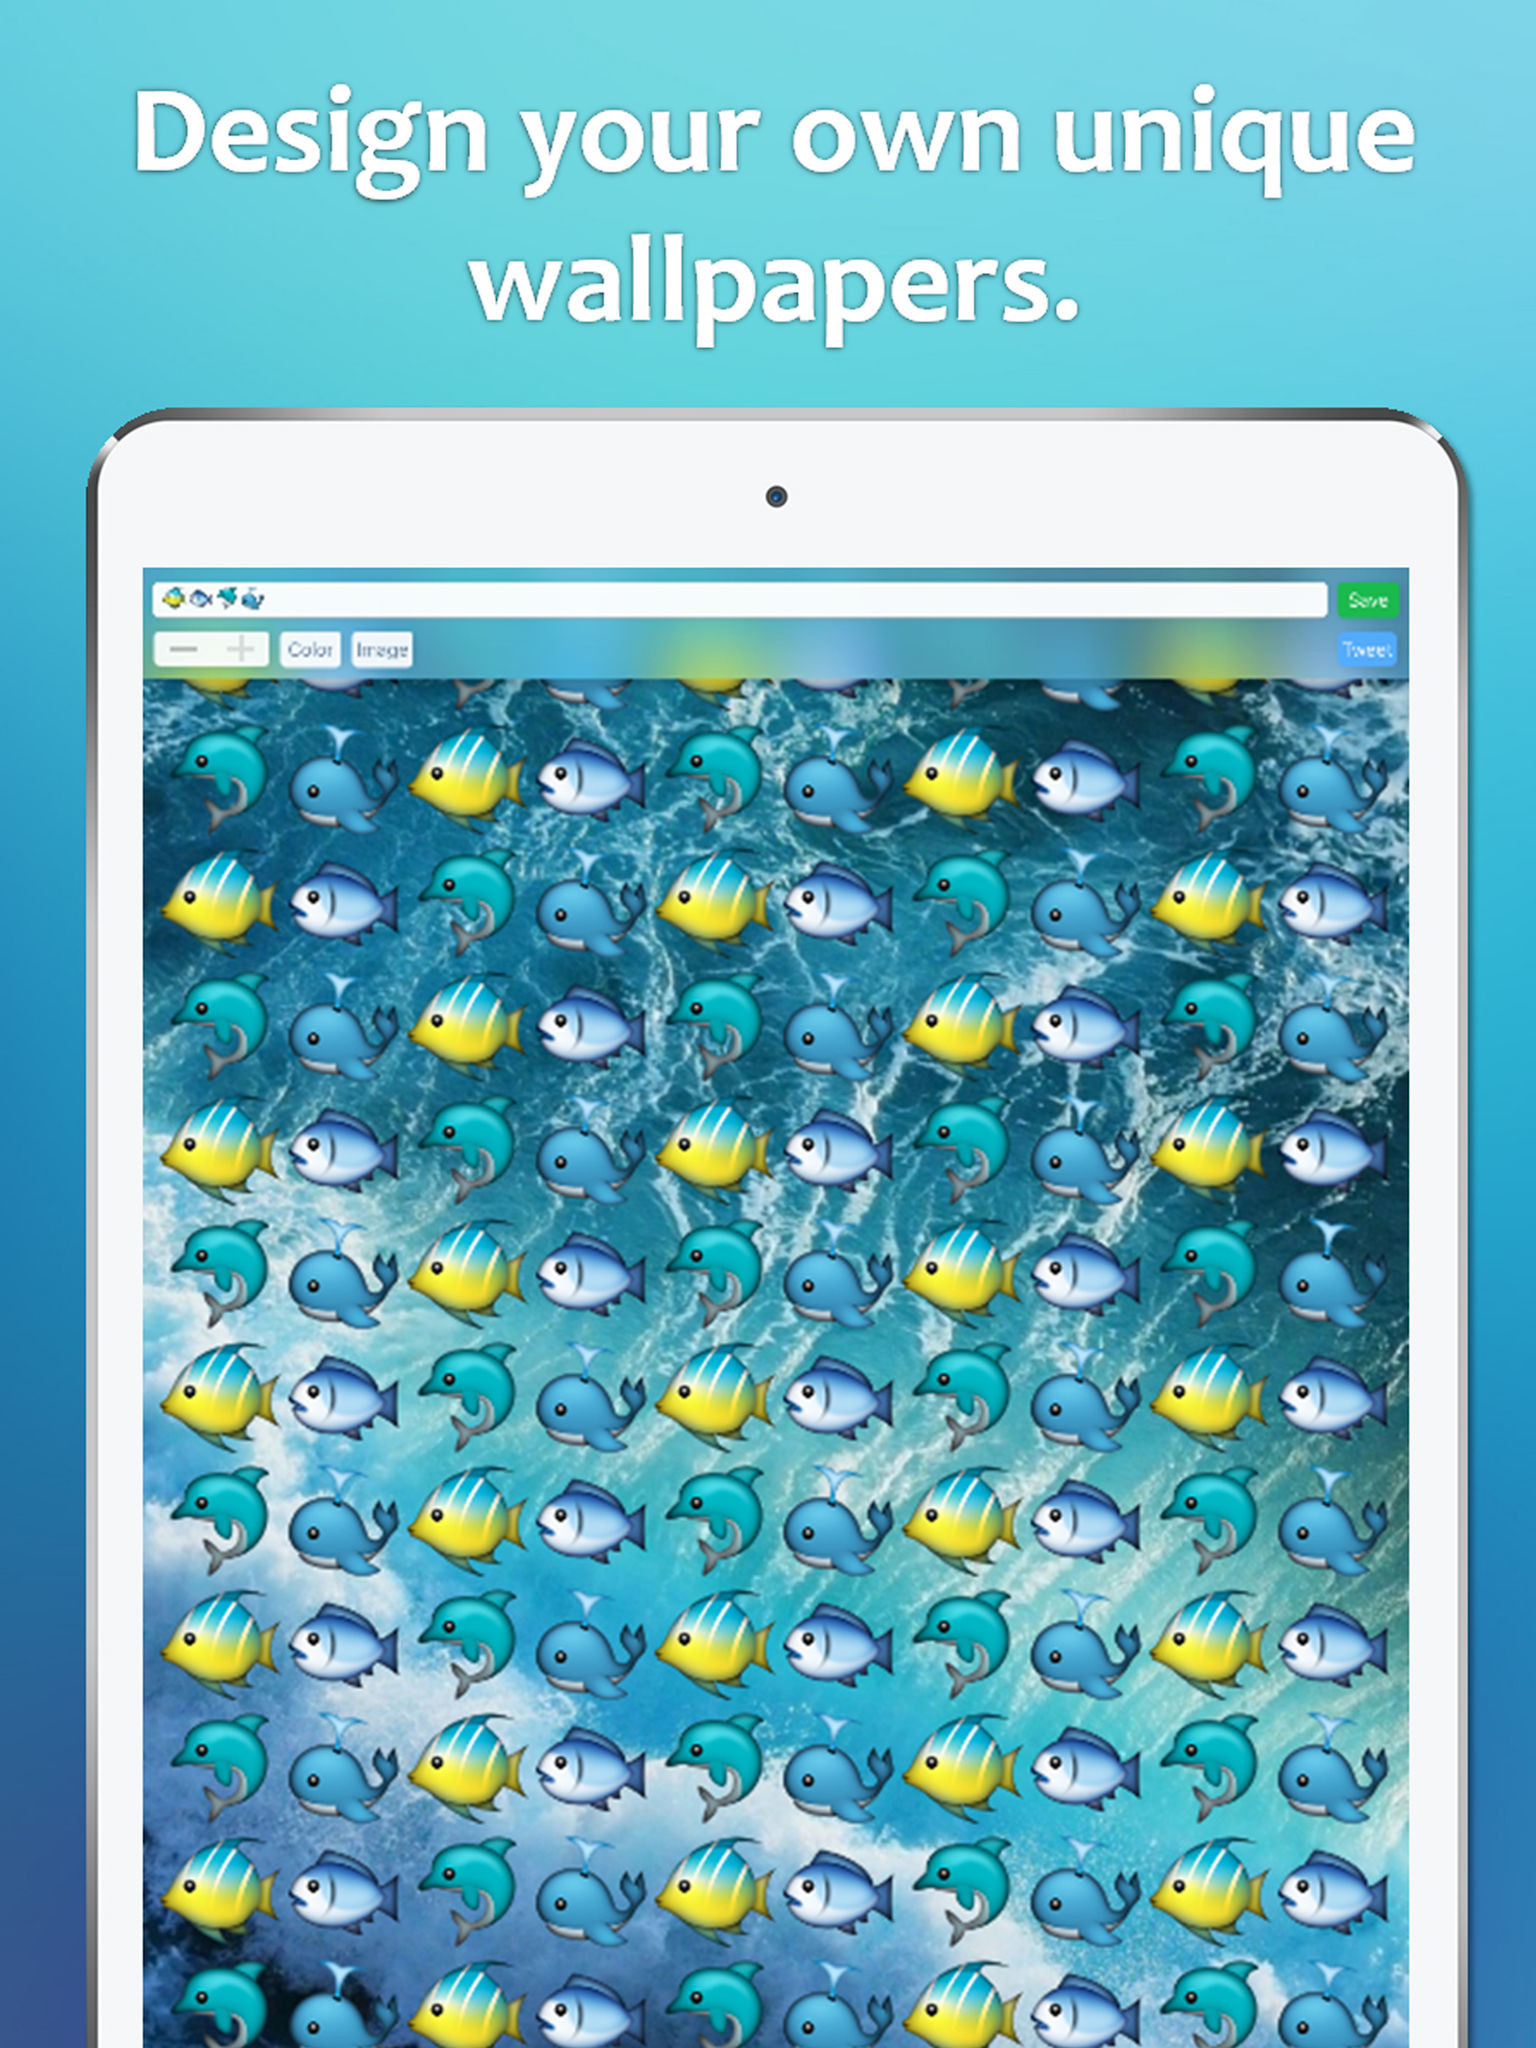 1536x2048 Save your wallpaper and then use it as an image background under a new emoji  wallpaper for a cool layering effect.